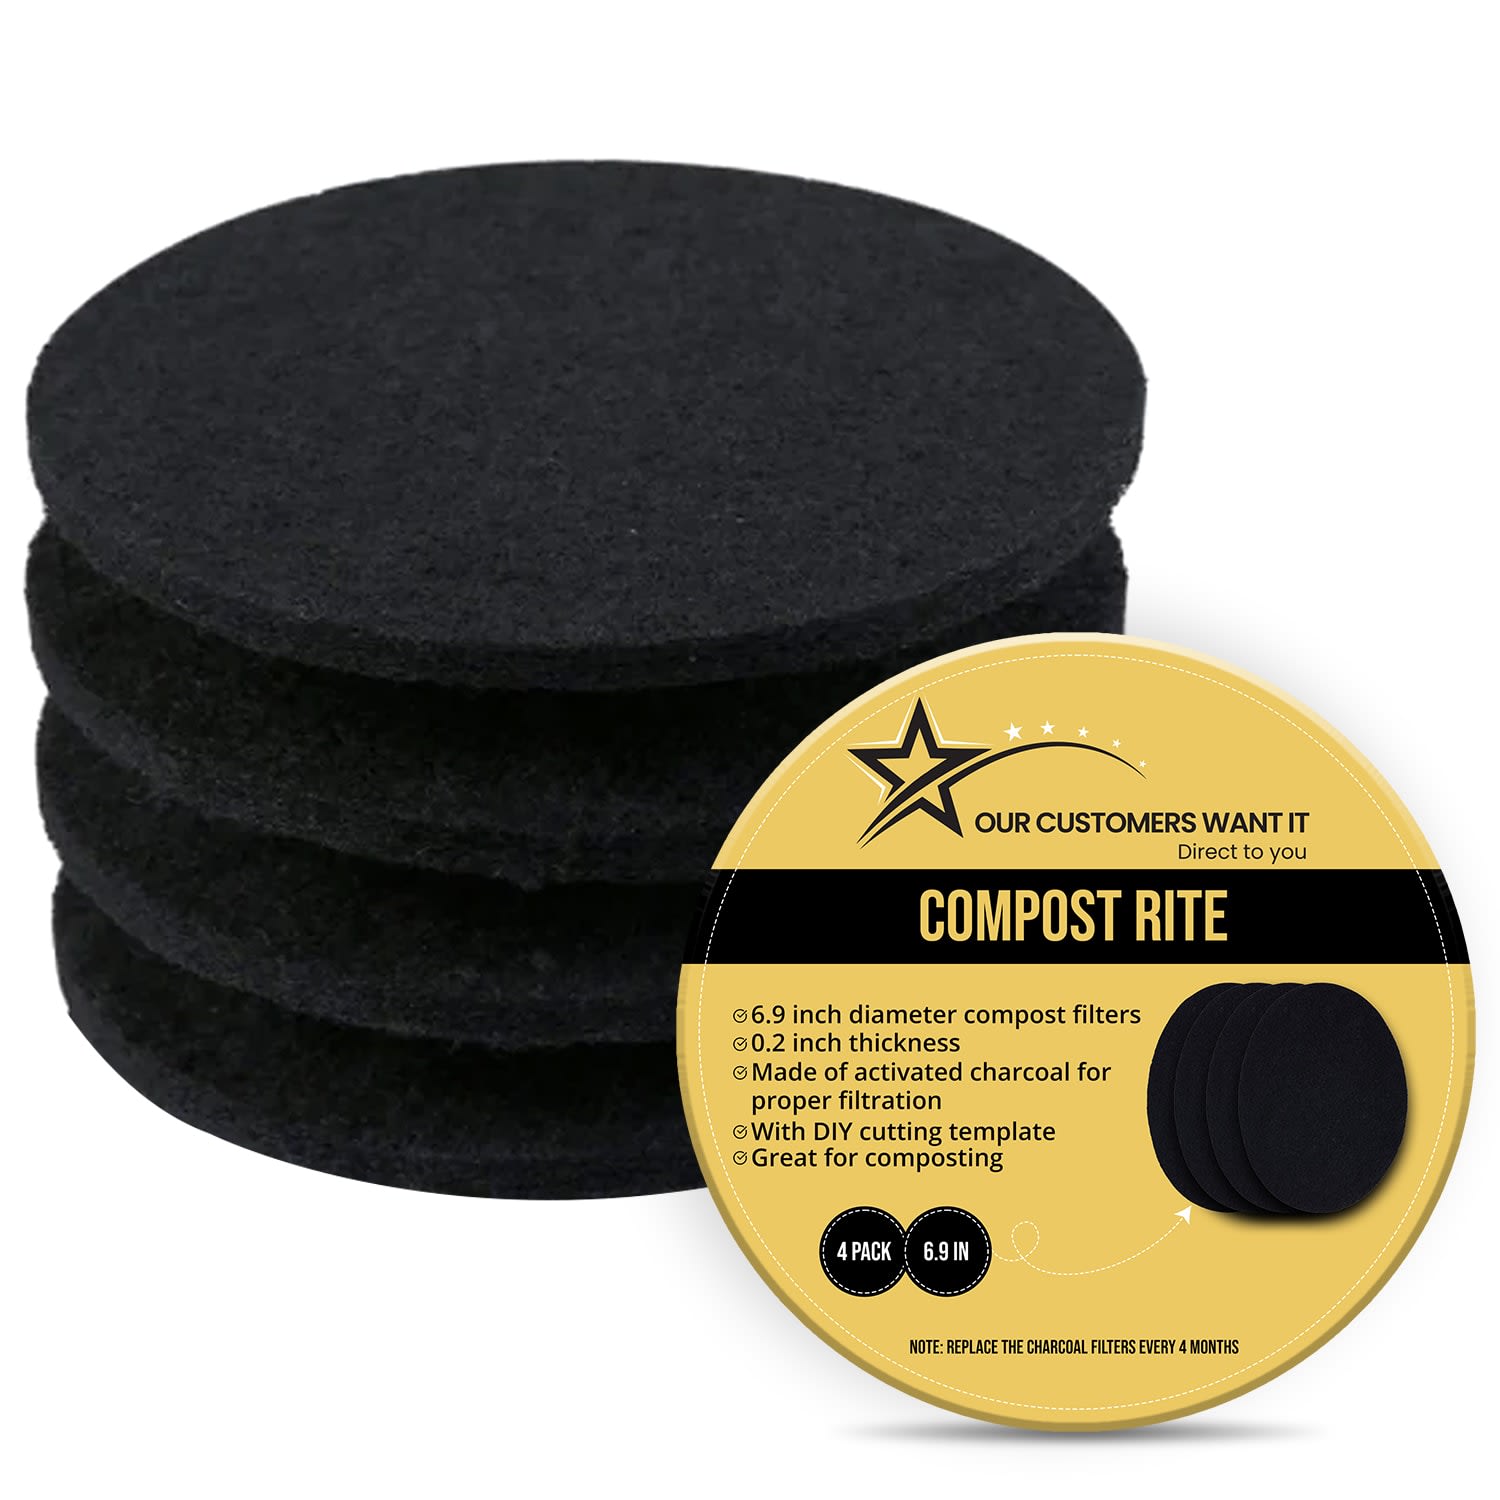 Compost Charcoal Filter